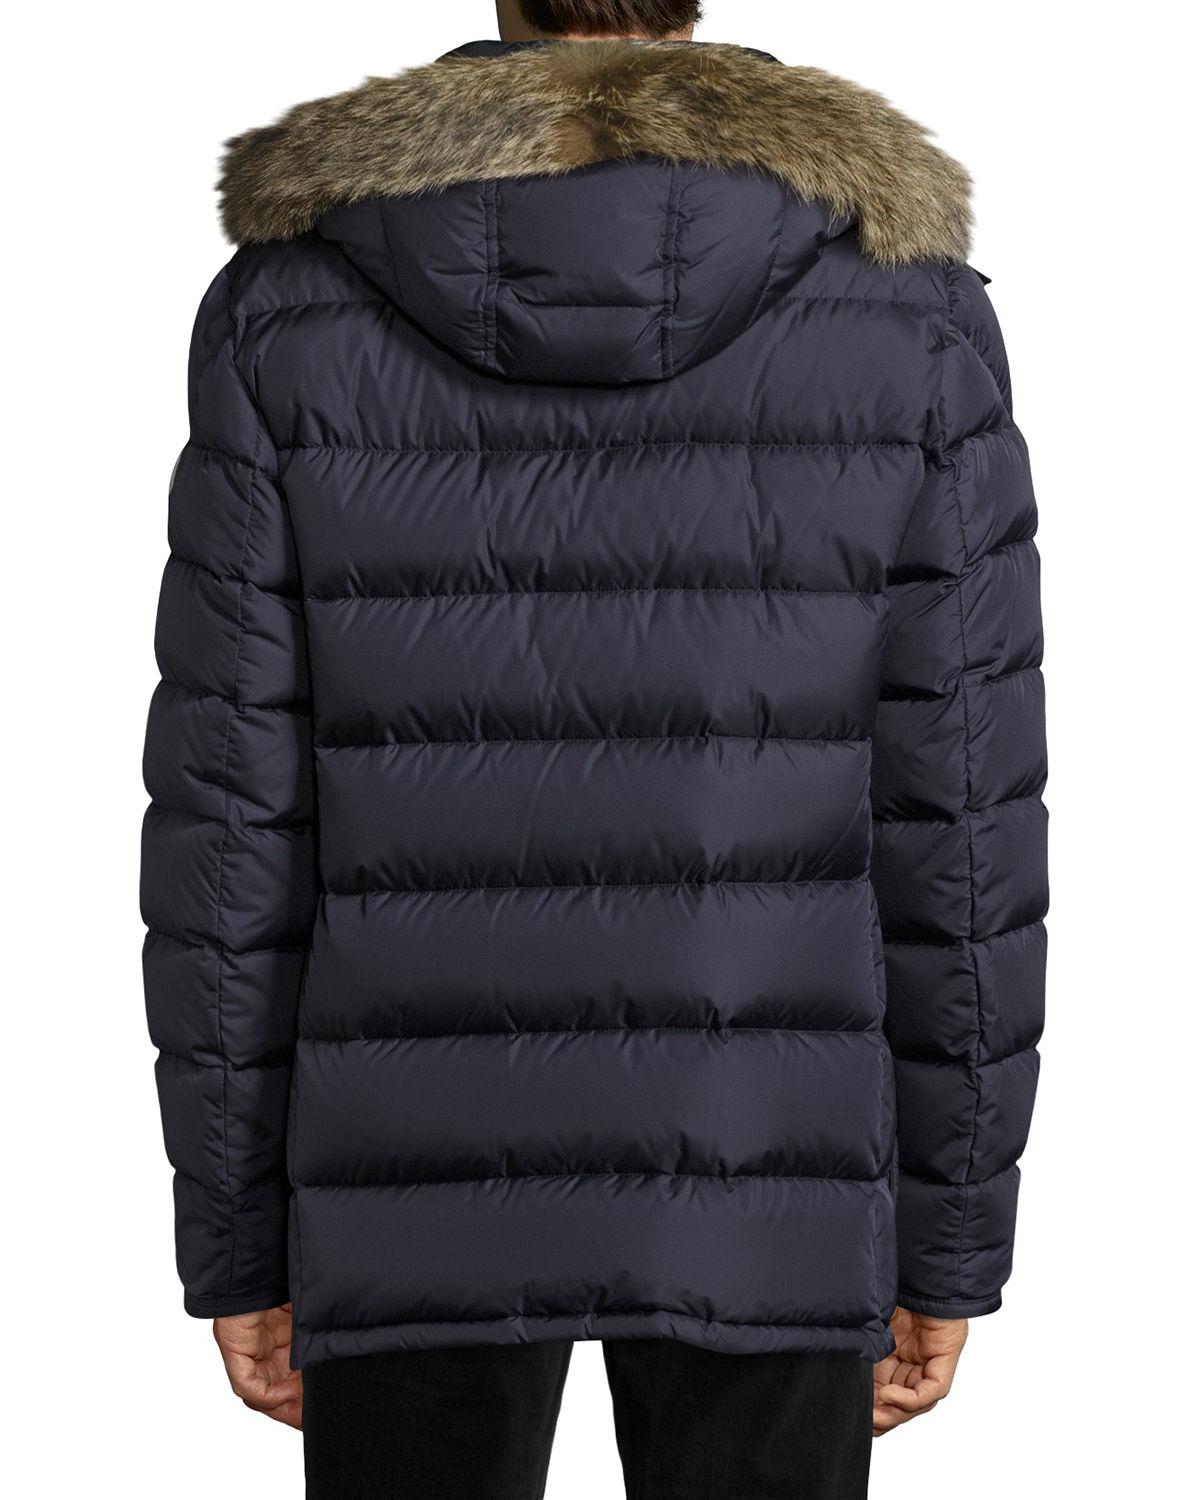 Lyst - Moncler Cluny Nylon Puffer Jacket With Fur Hood in Blue for Men